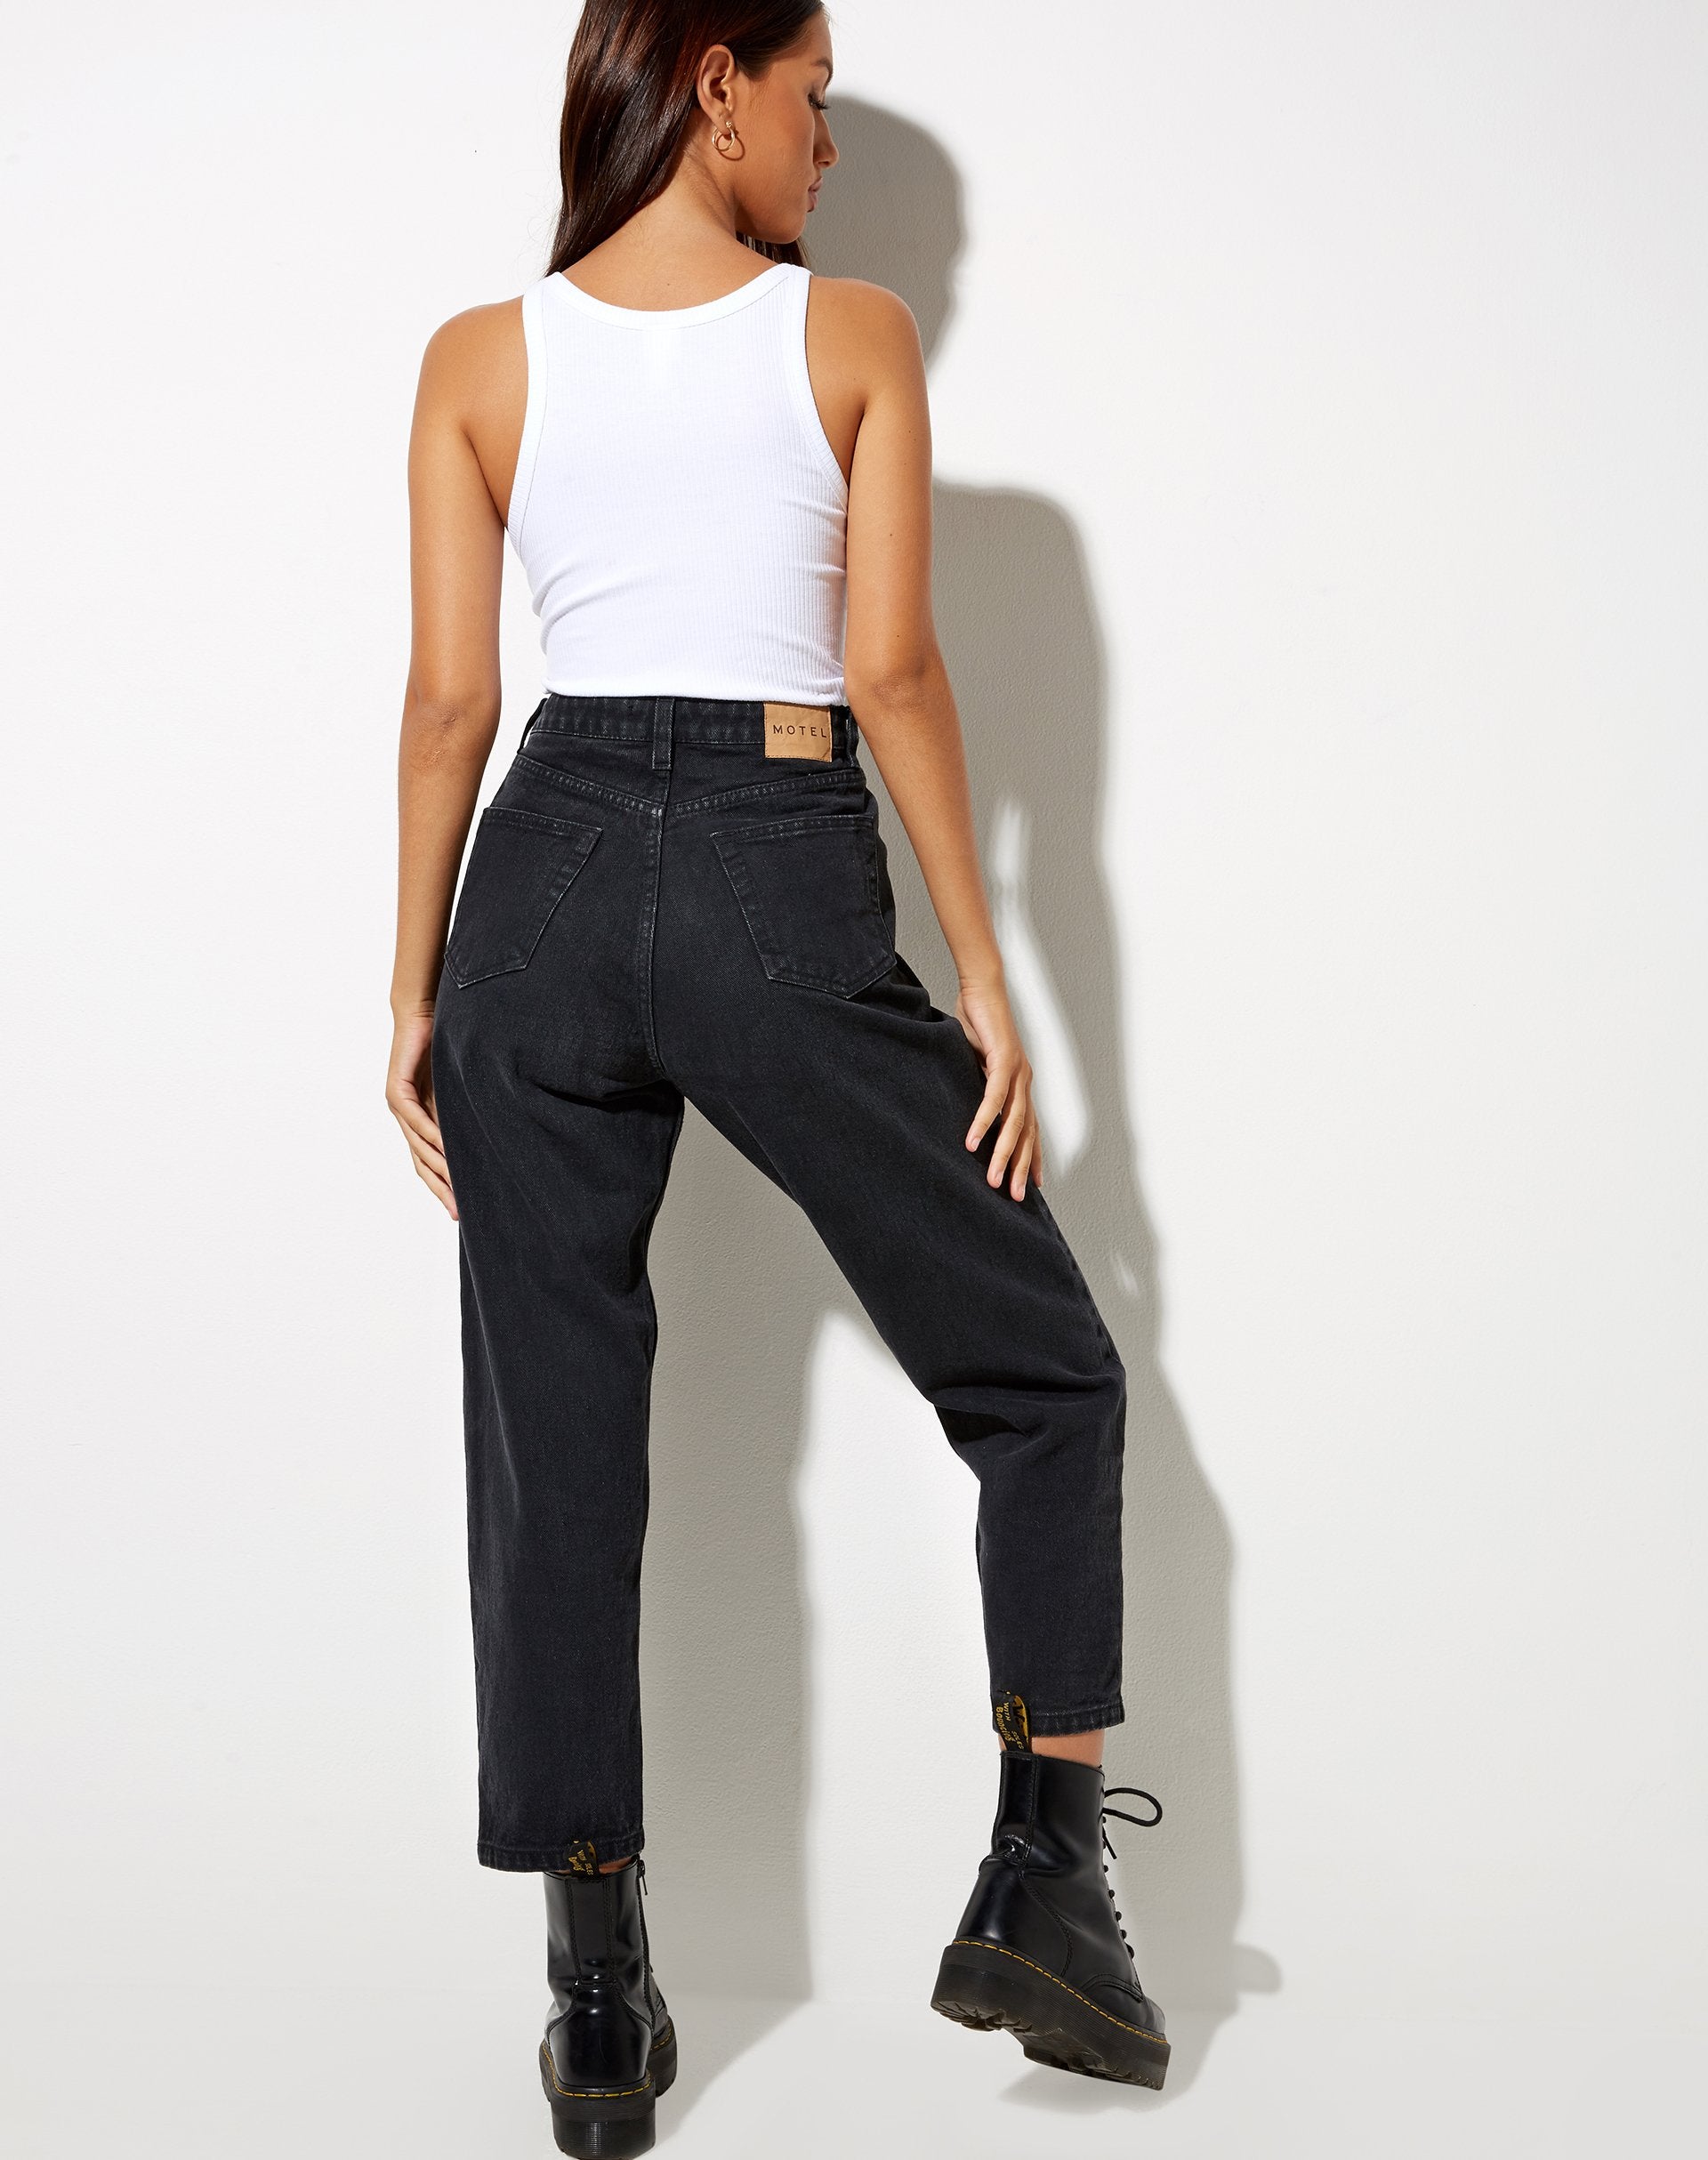 Image of Mom Jeans in Black Wash